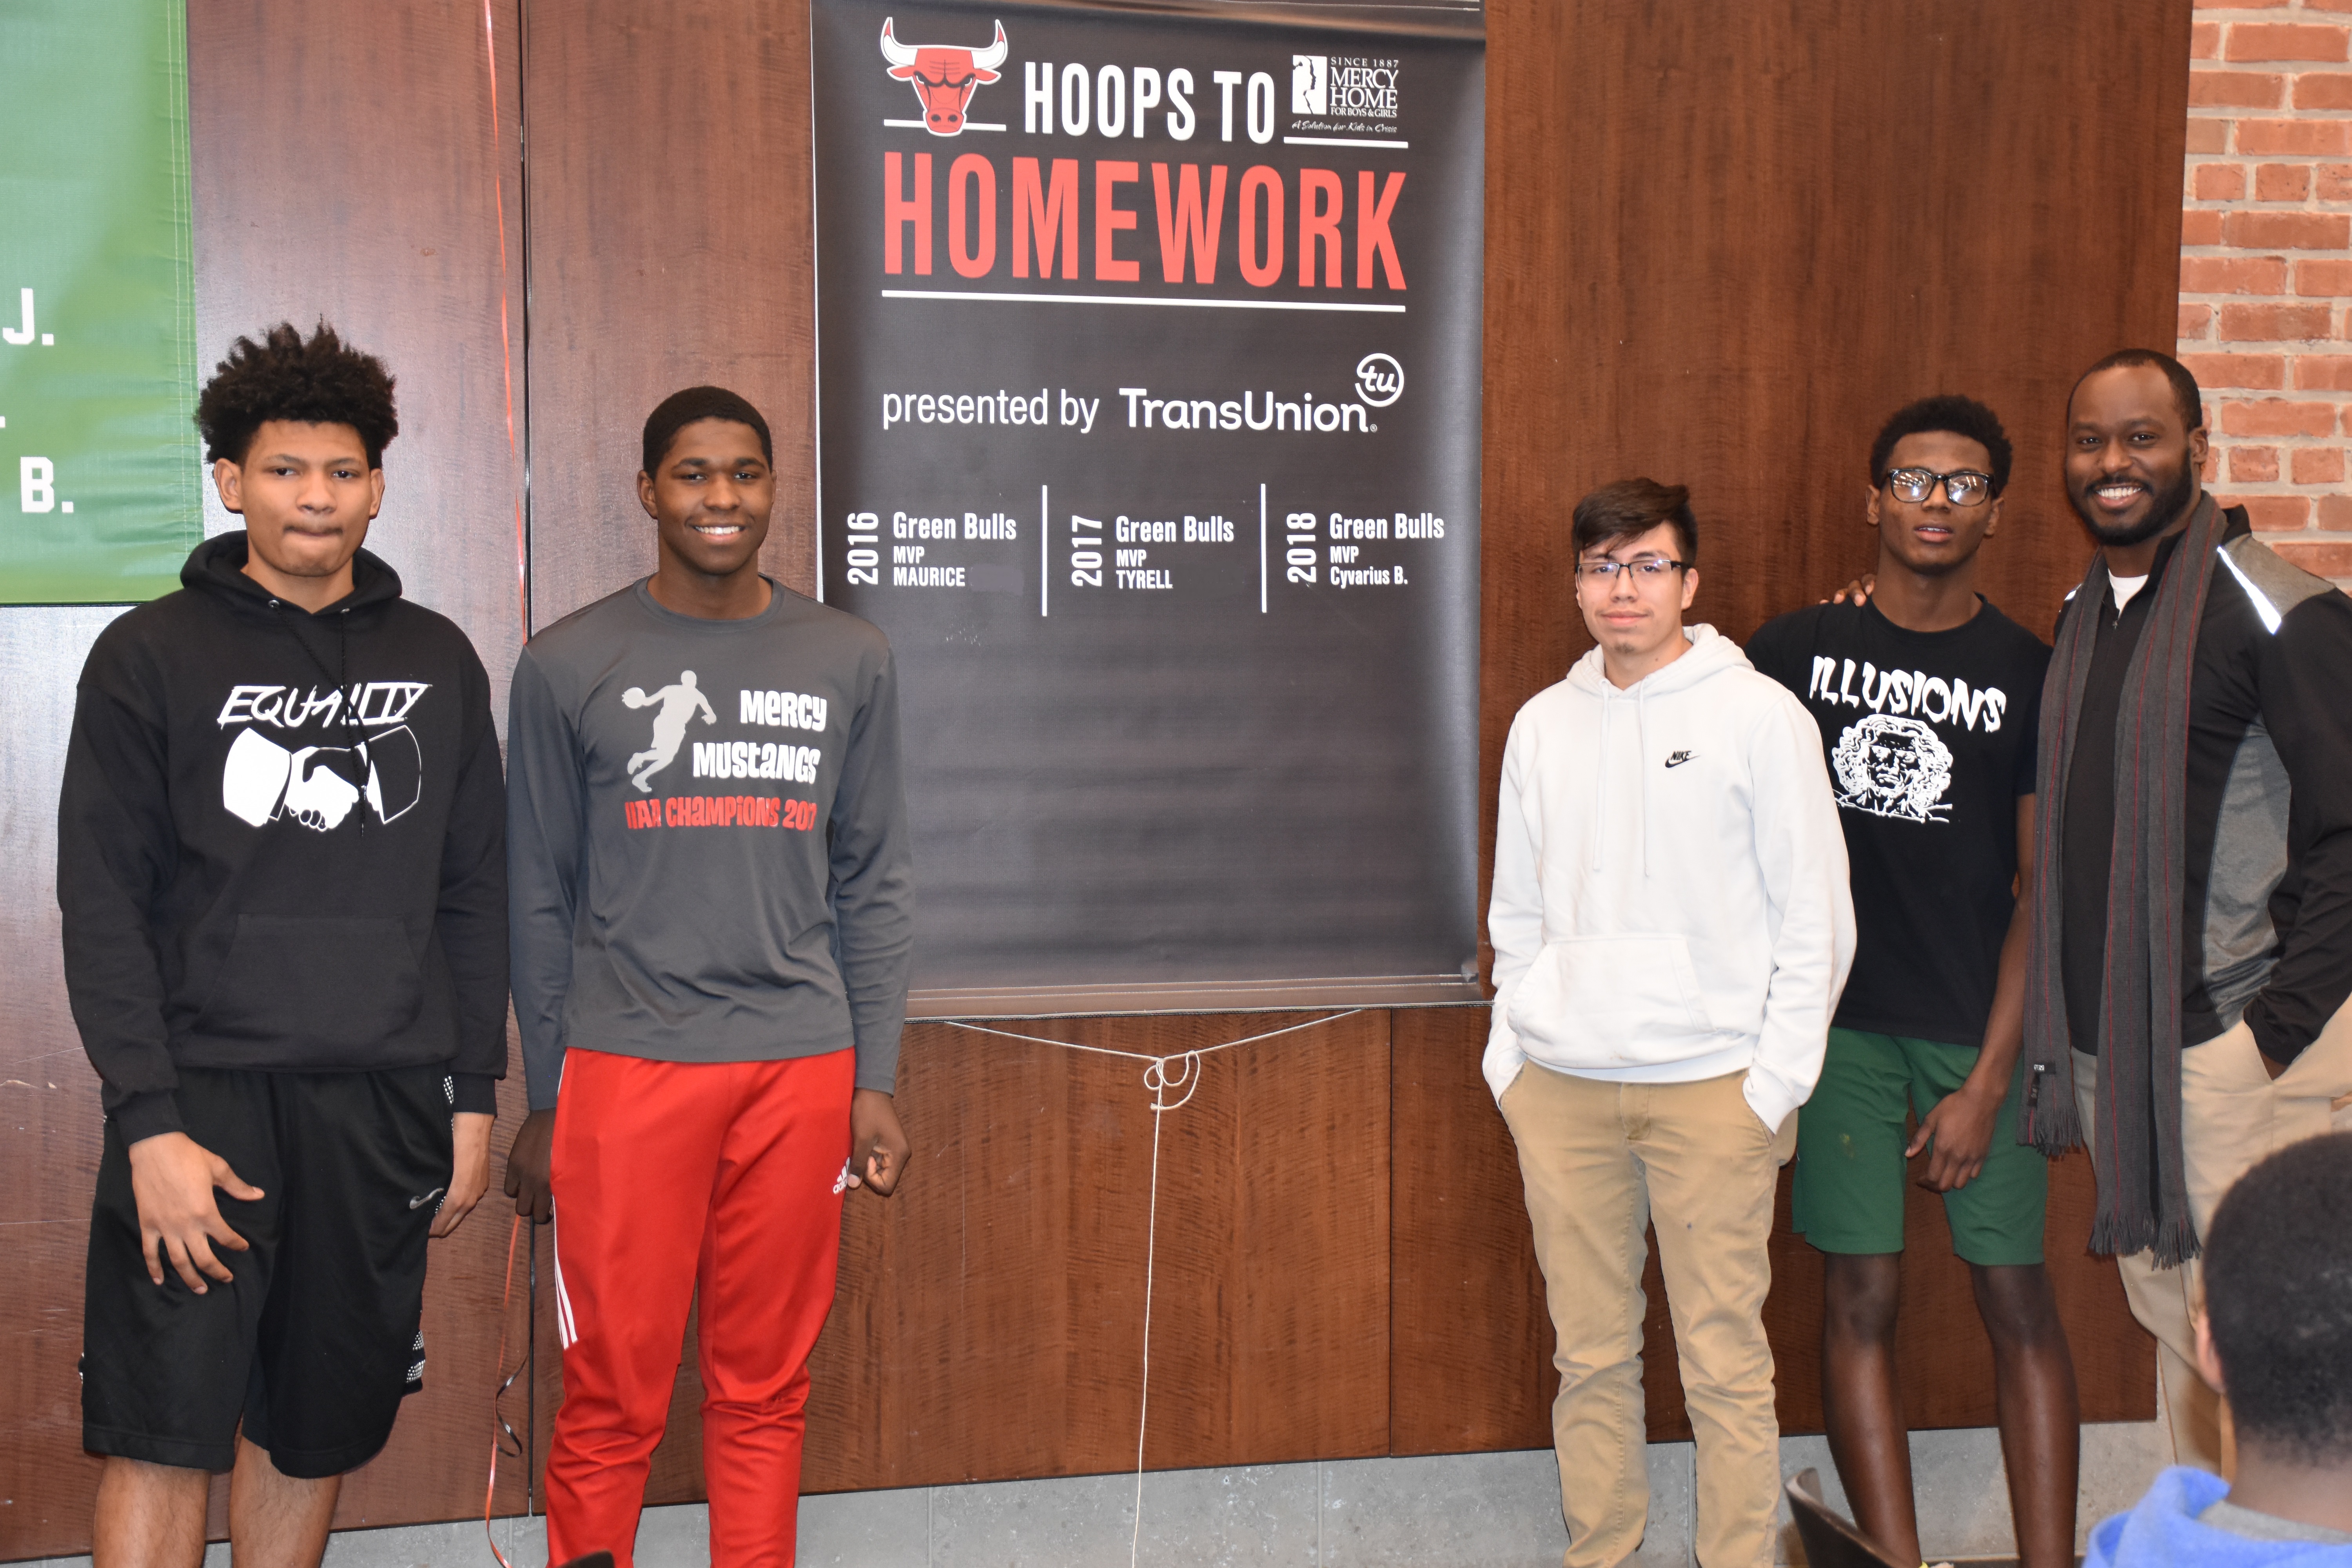 Mercy Home youth standing by hoops to homework banner